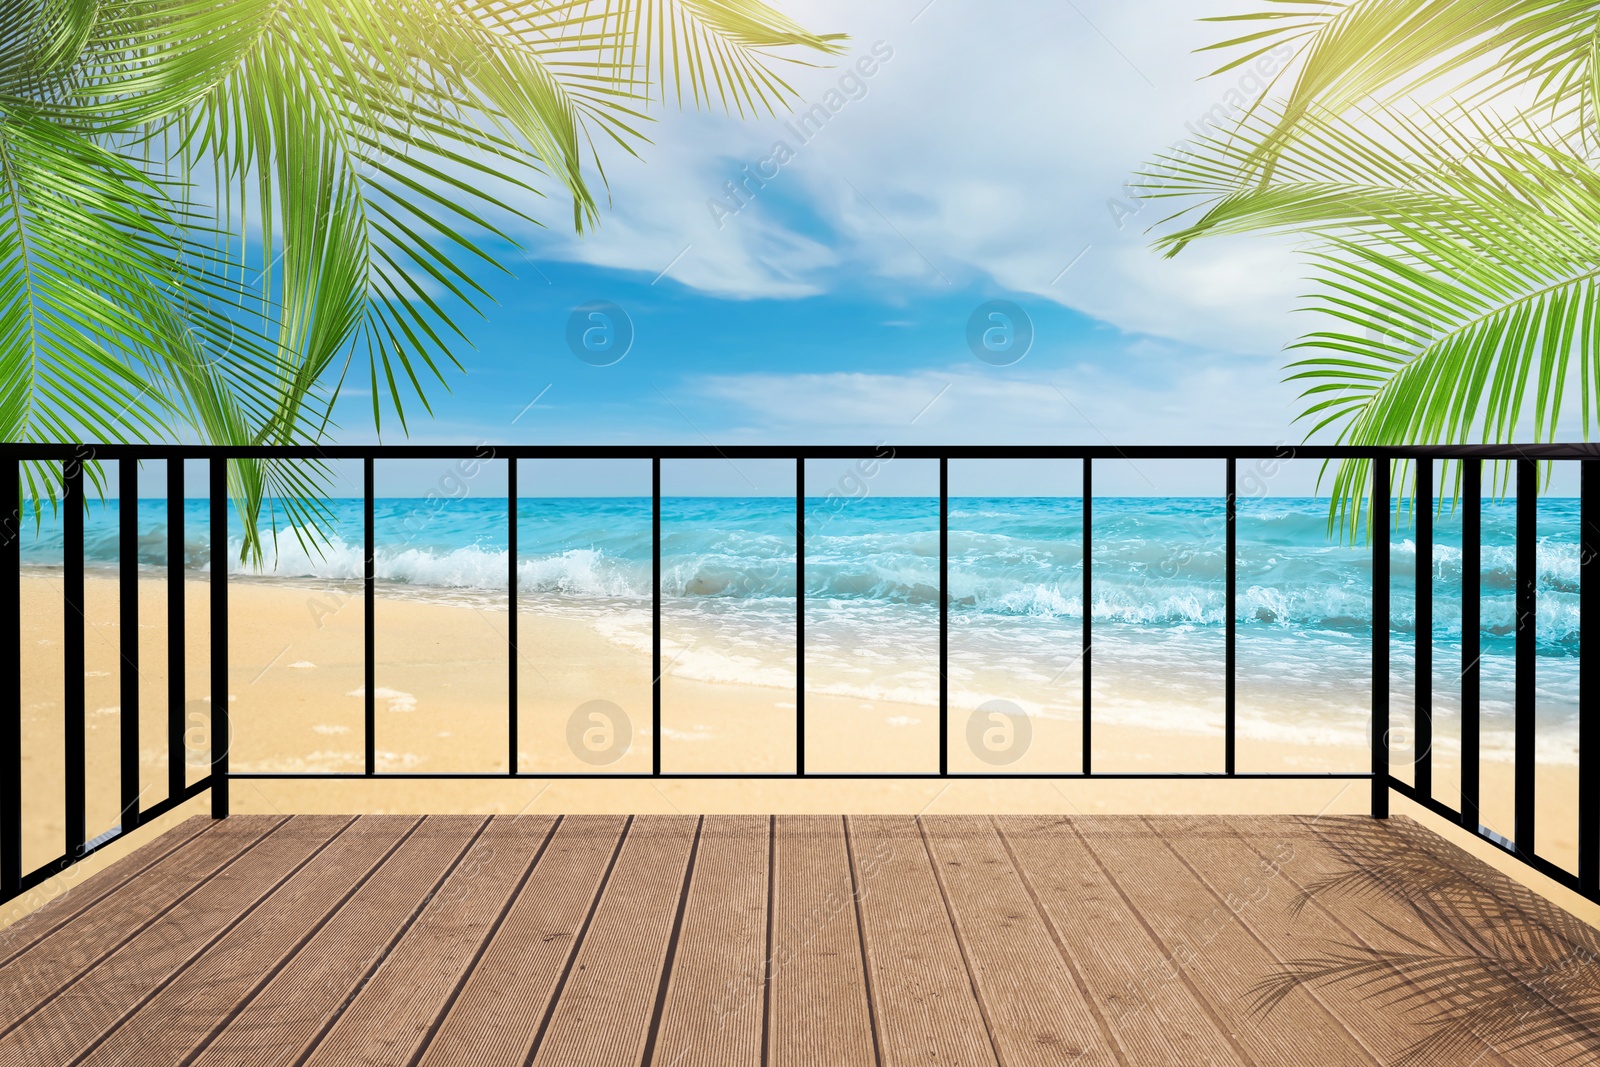 Image of Outdoor wooden terrace revealing picturesque view on ocean shore with palm trees